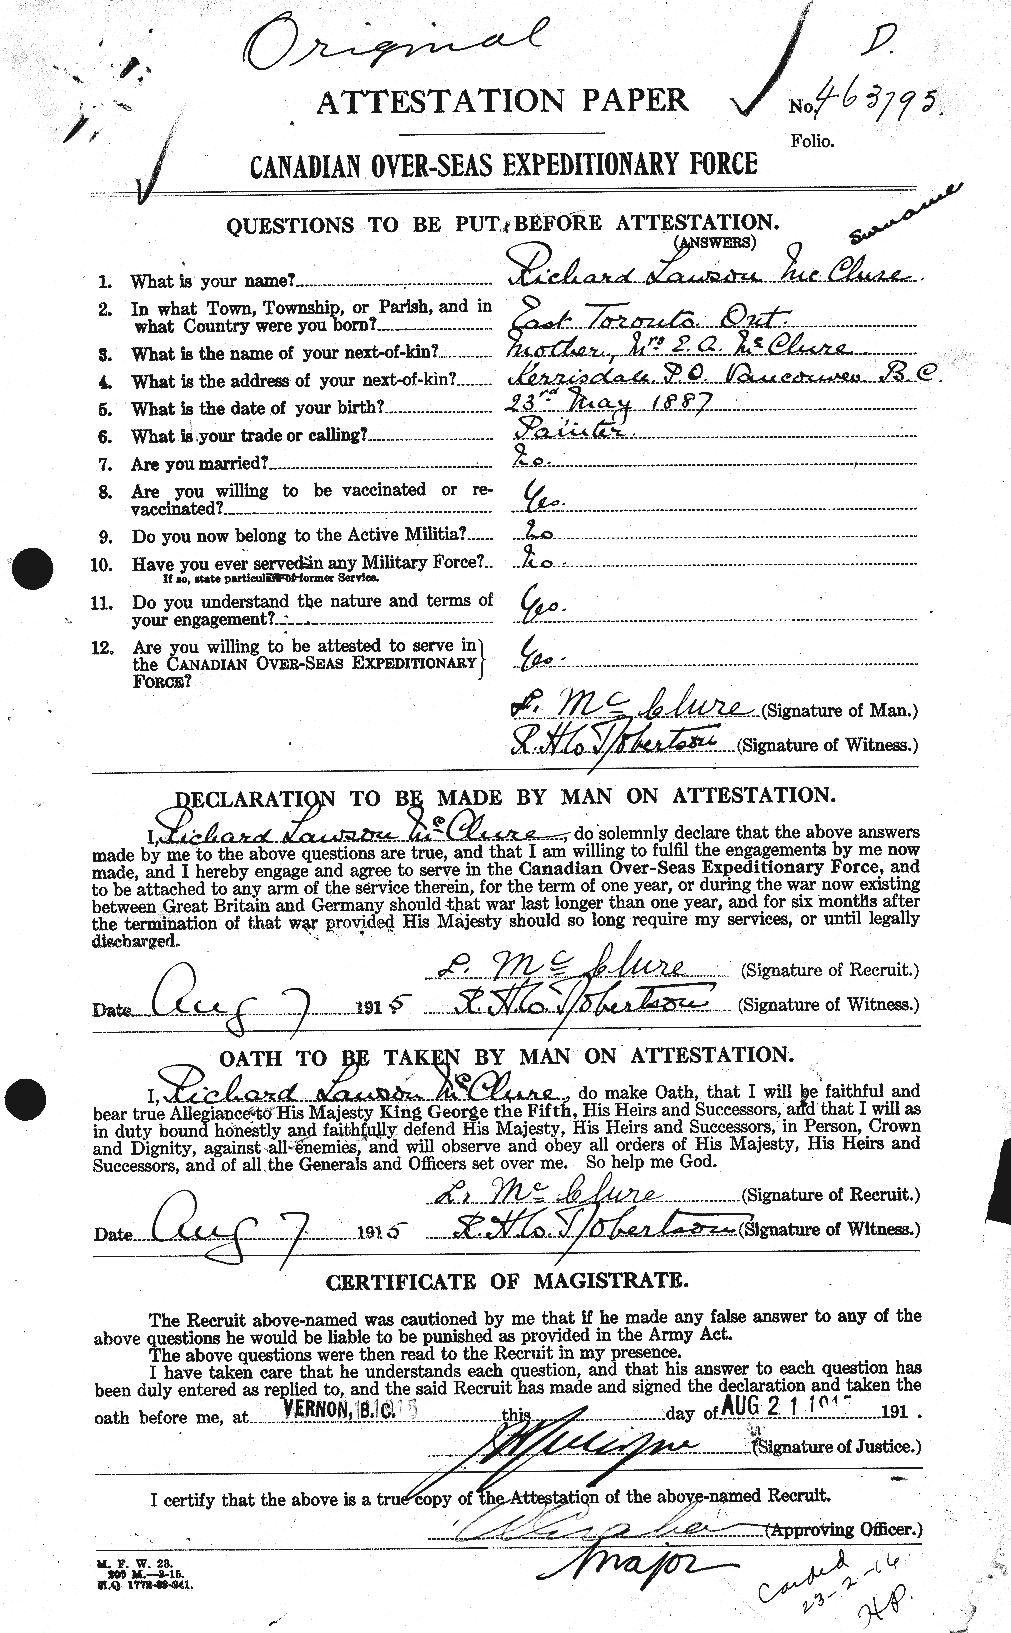 Personnel Records of the First World War - CEF 133966a